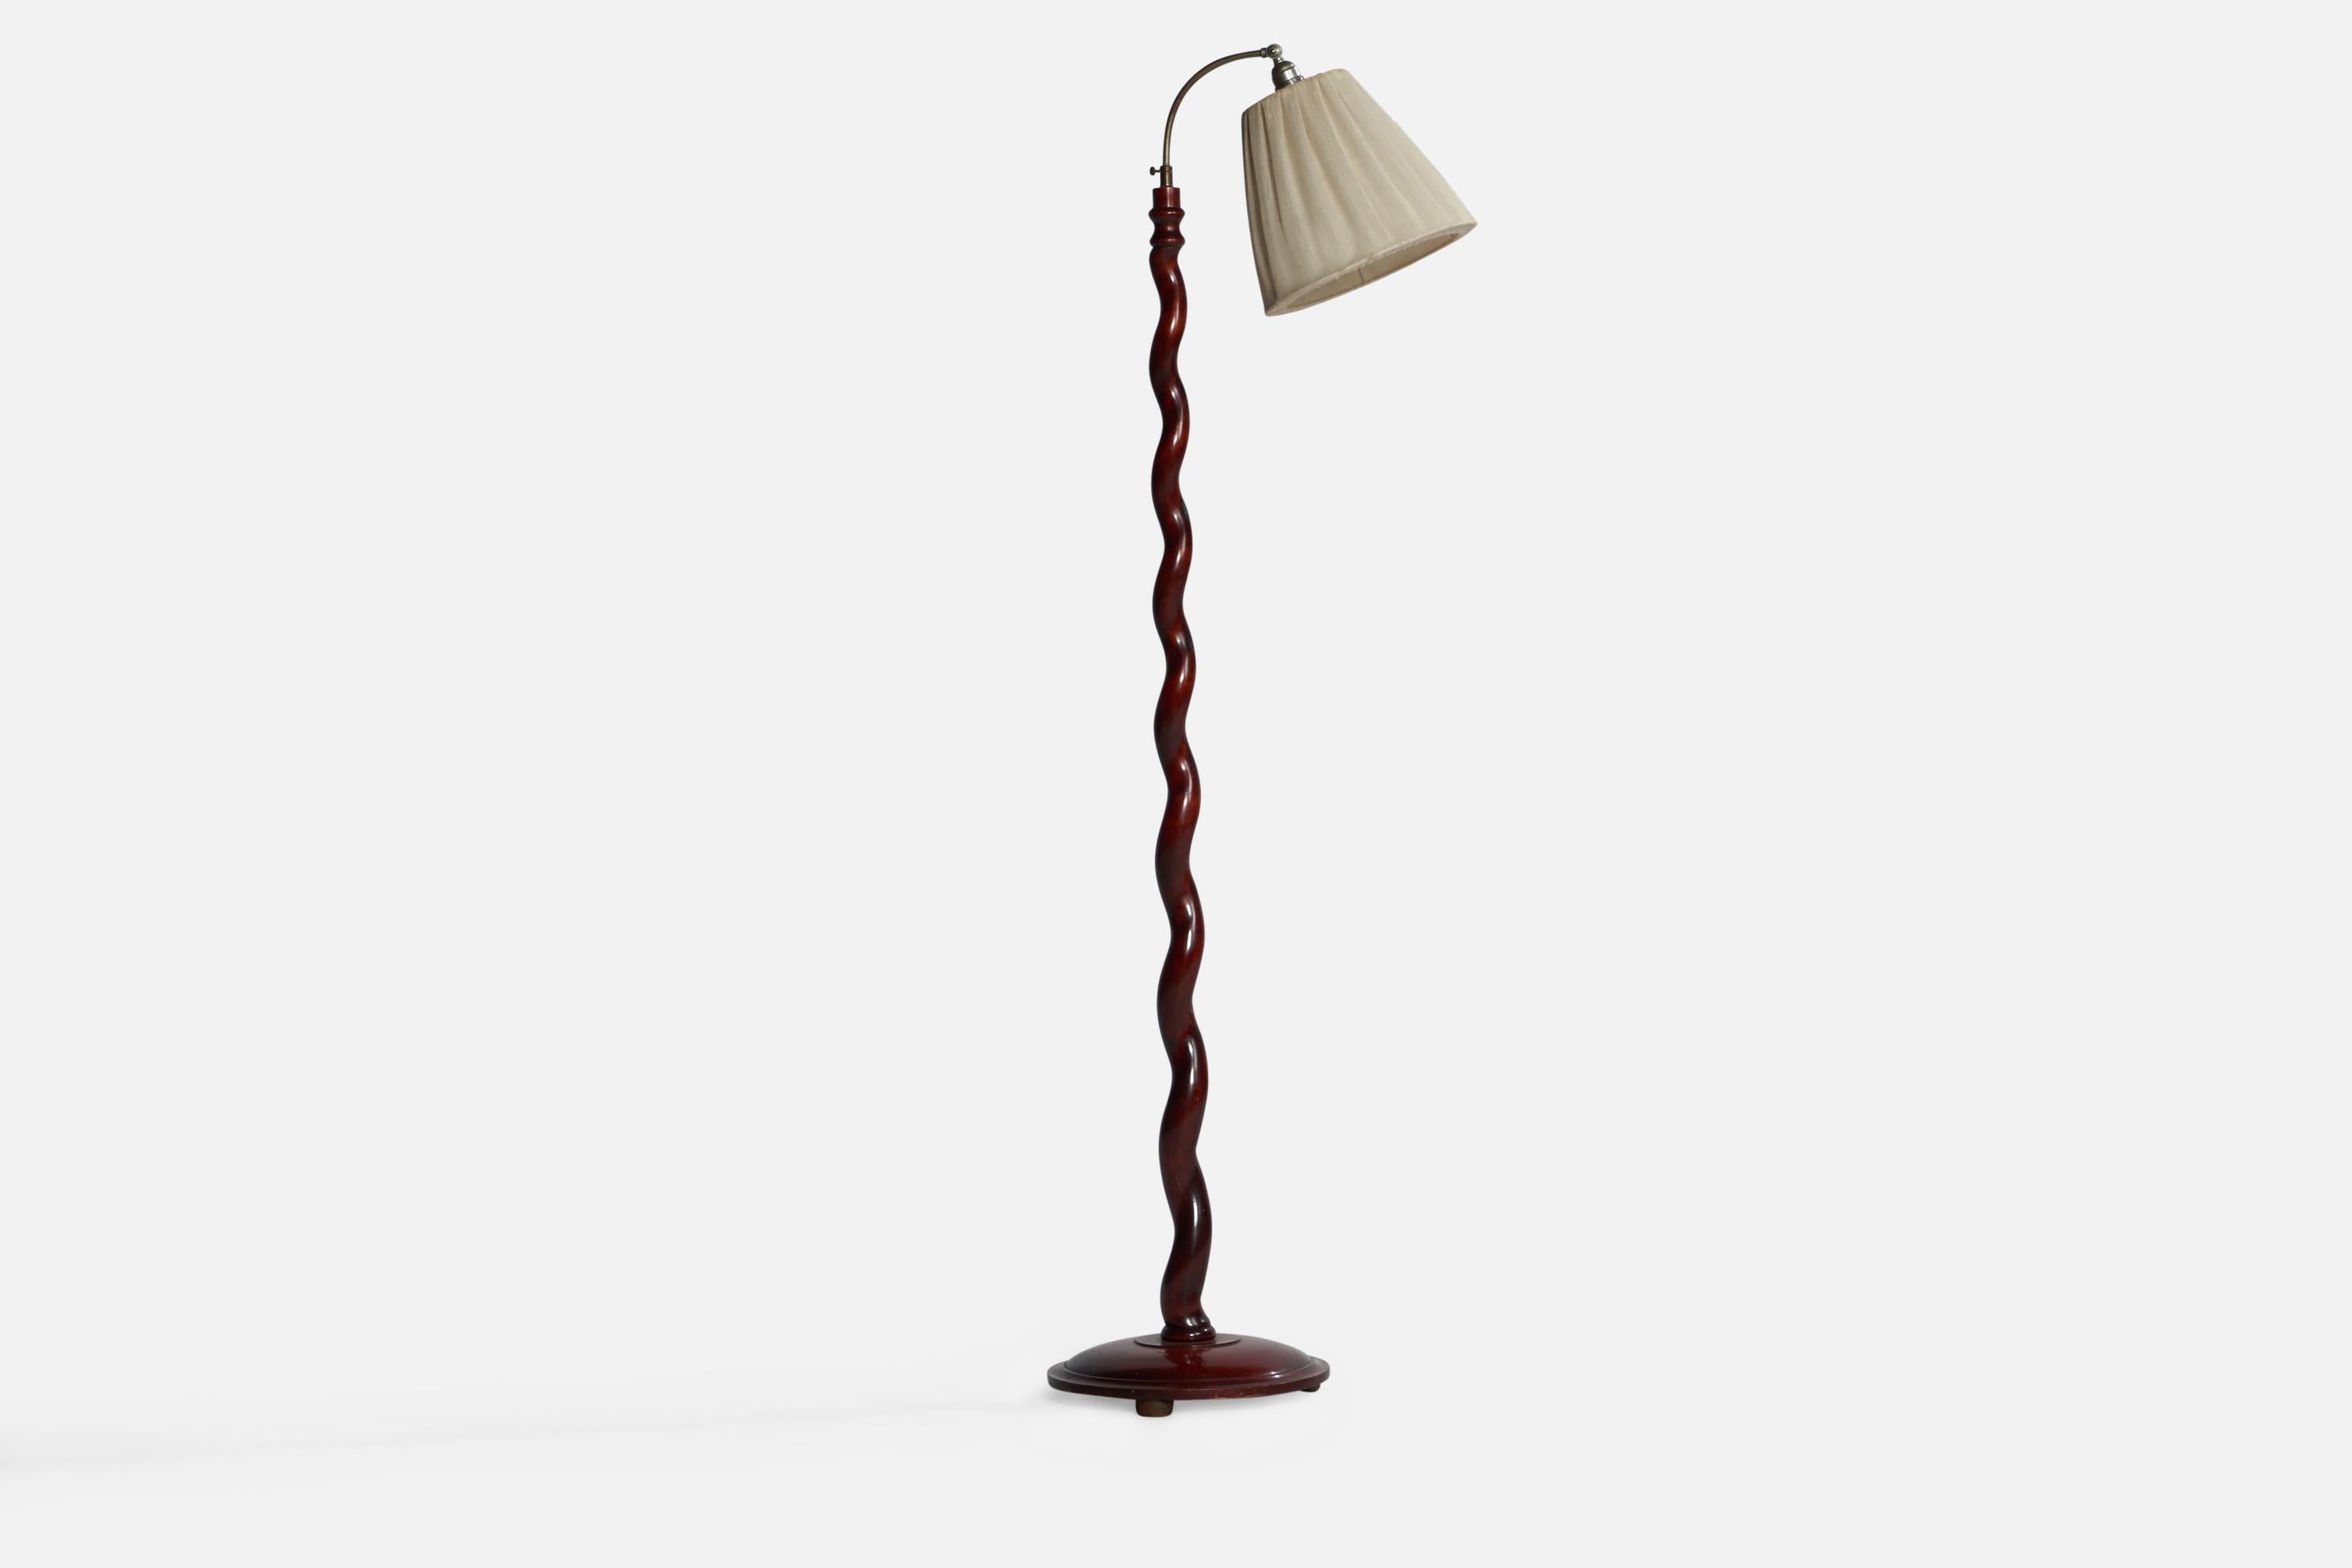 A mahogany, steel and off-white fabric floor lamp designed and produced in Sweden, 1930s.

Overall Dimensions (inches): 63.5” H x 13.5” W x 23.75” D. Stated dimensions include shade.
Dimensions vary based on position of light.
Bulb Specifications: